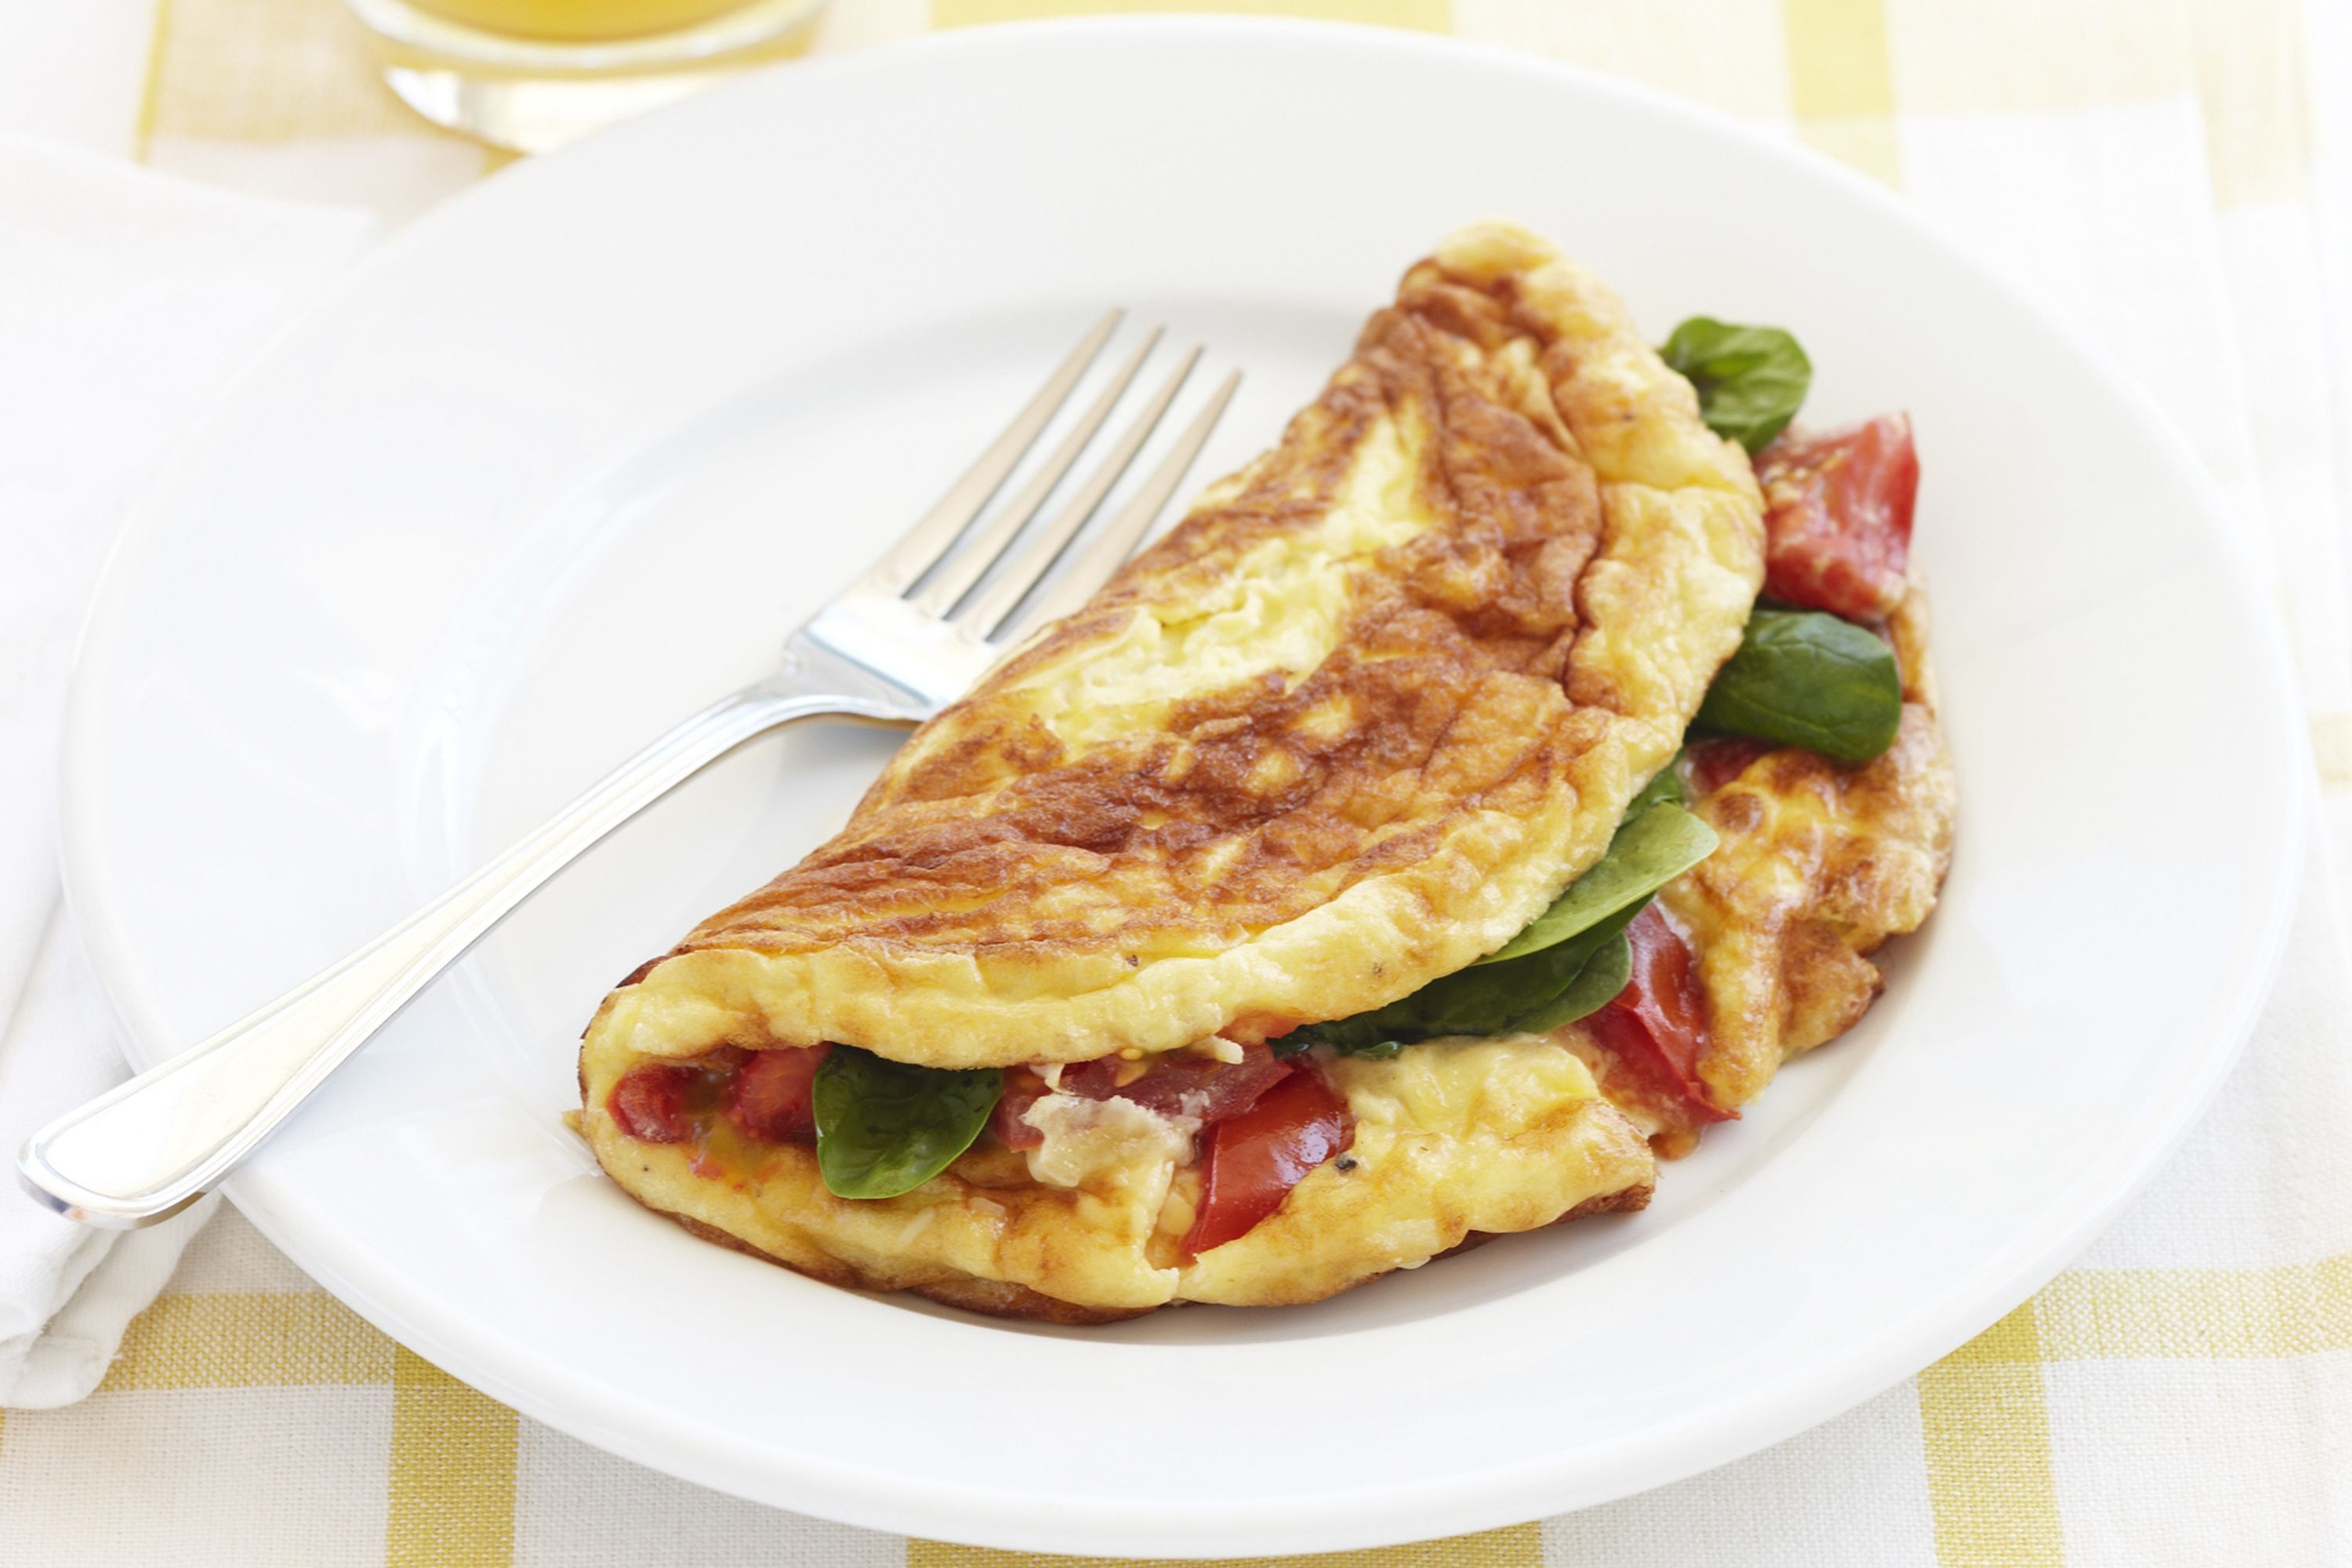 spinach-cheese-tomato-omelette-91188-1